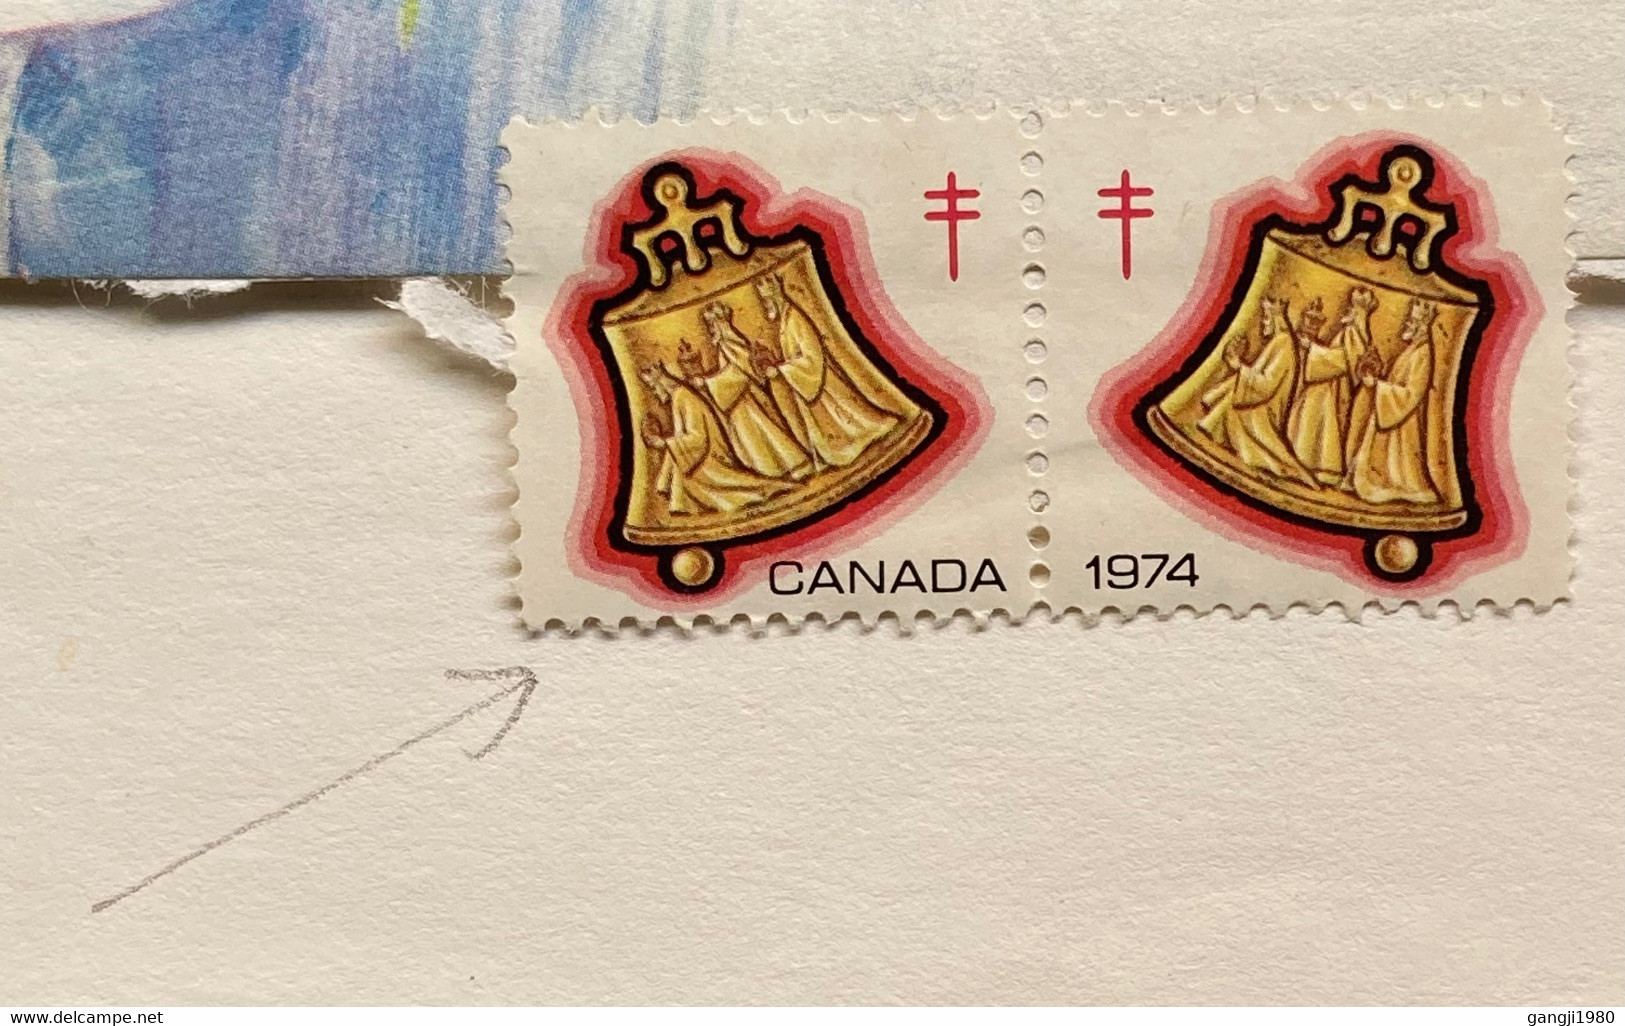 CANADA -1974, COVER USED, ARMY, MILITARY, CANADA FIELD POST OFFICE NO-43, WORLD CYCLE CHAMPIAN STAMP, BIRD, BELL, CHRIST